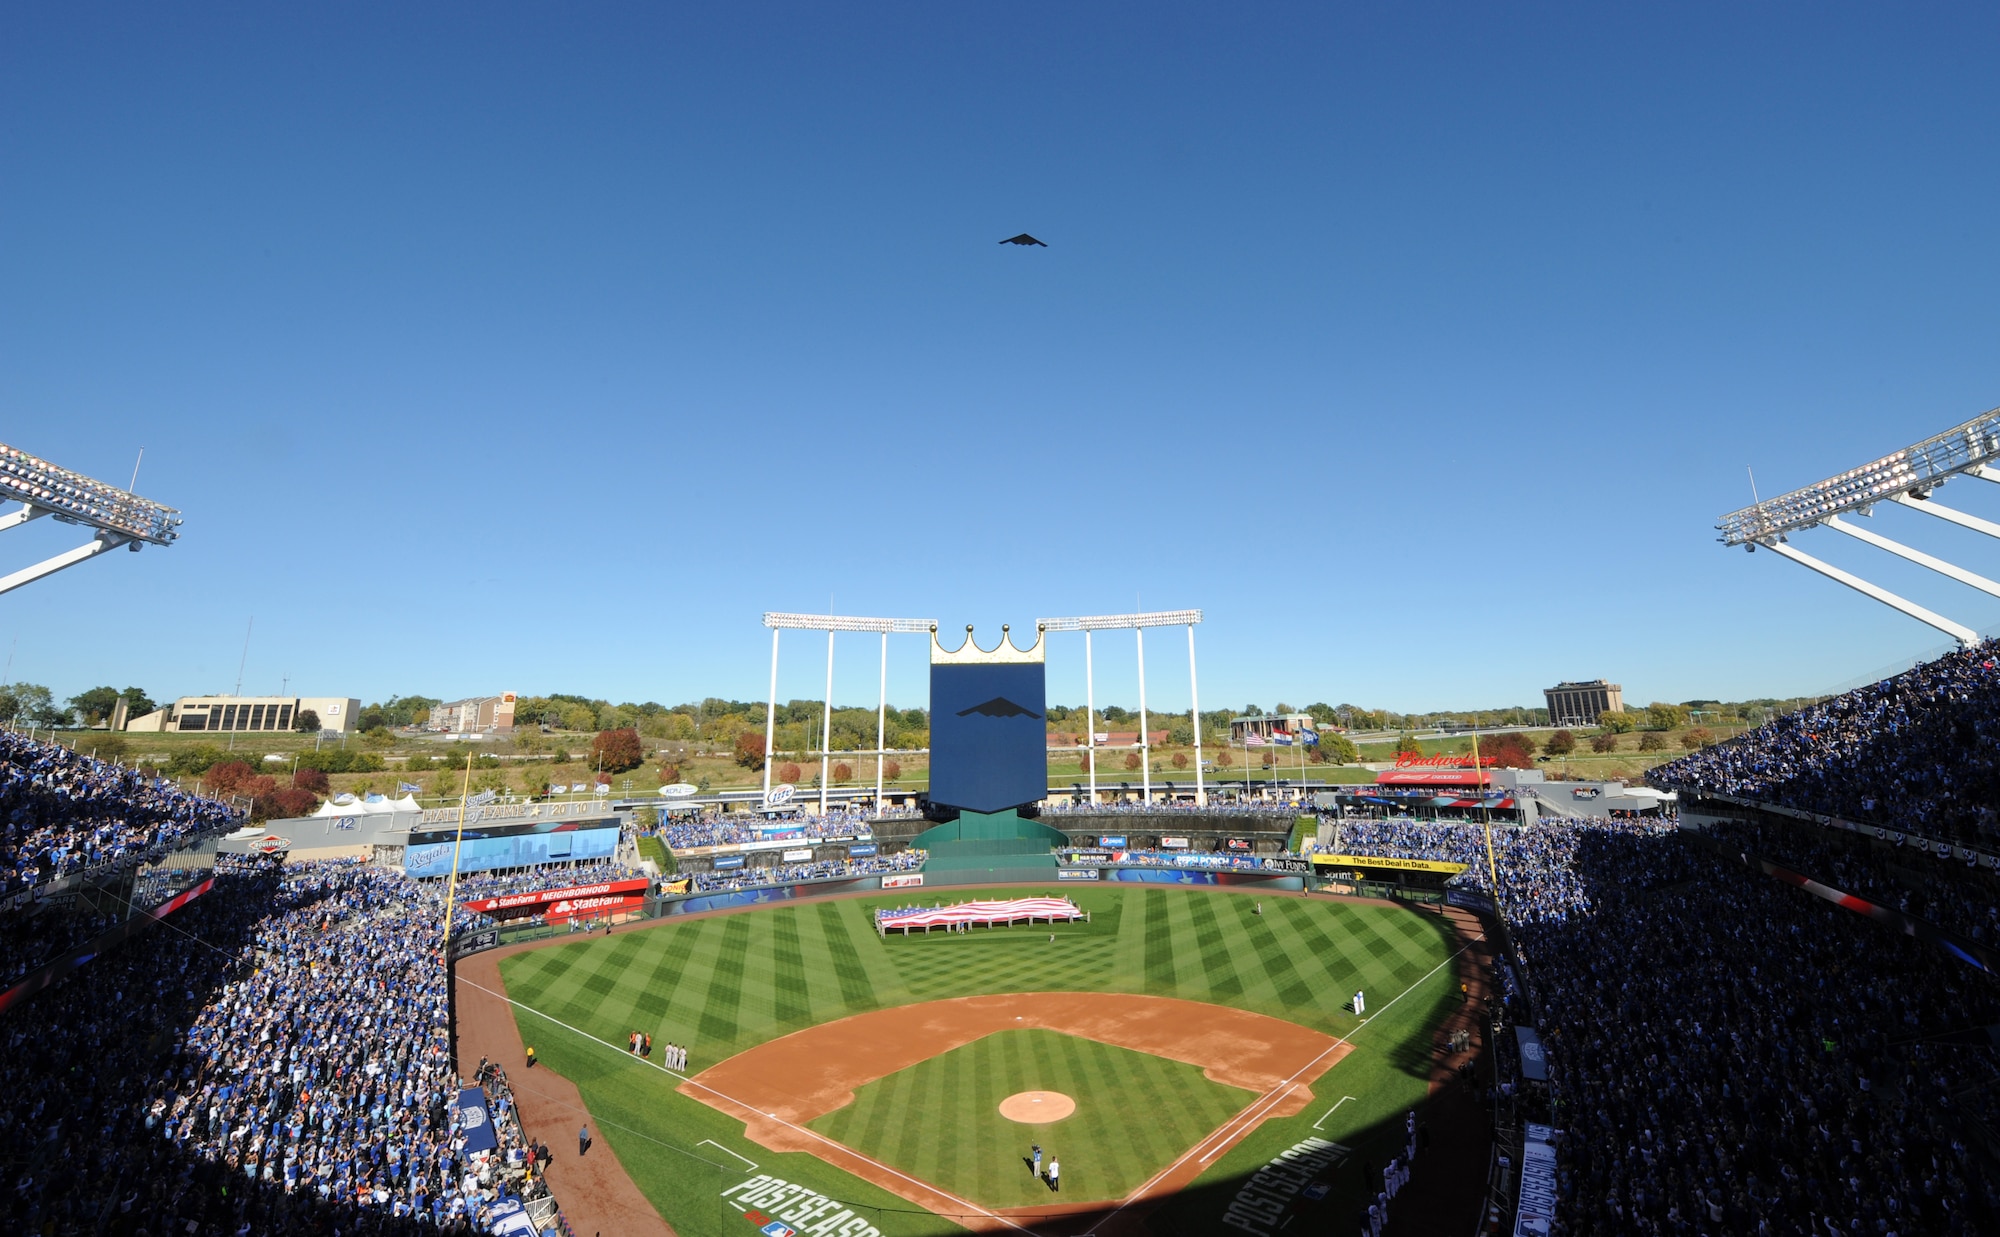 A B-2 Spirit stealth bomber from Whiteman Air Force Base, Mo., flies over the Royals vs. Orioles baseball game at Kauffman Stadium in Kansas City, Mo., Oct. 15, 2014. Airmen from the 509th Bomb Wing and 131st Bomb Wing at Whiteman performed the flag detail and represented the U.S. Air Force to a packed stadium as well as a TV viewership of millions during Game 4 of the American League Championship Series. (U.S. Air Force photo by Airman 1st Class Joel Pfiester/Released)